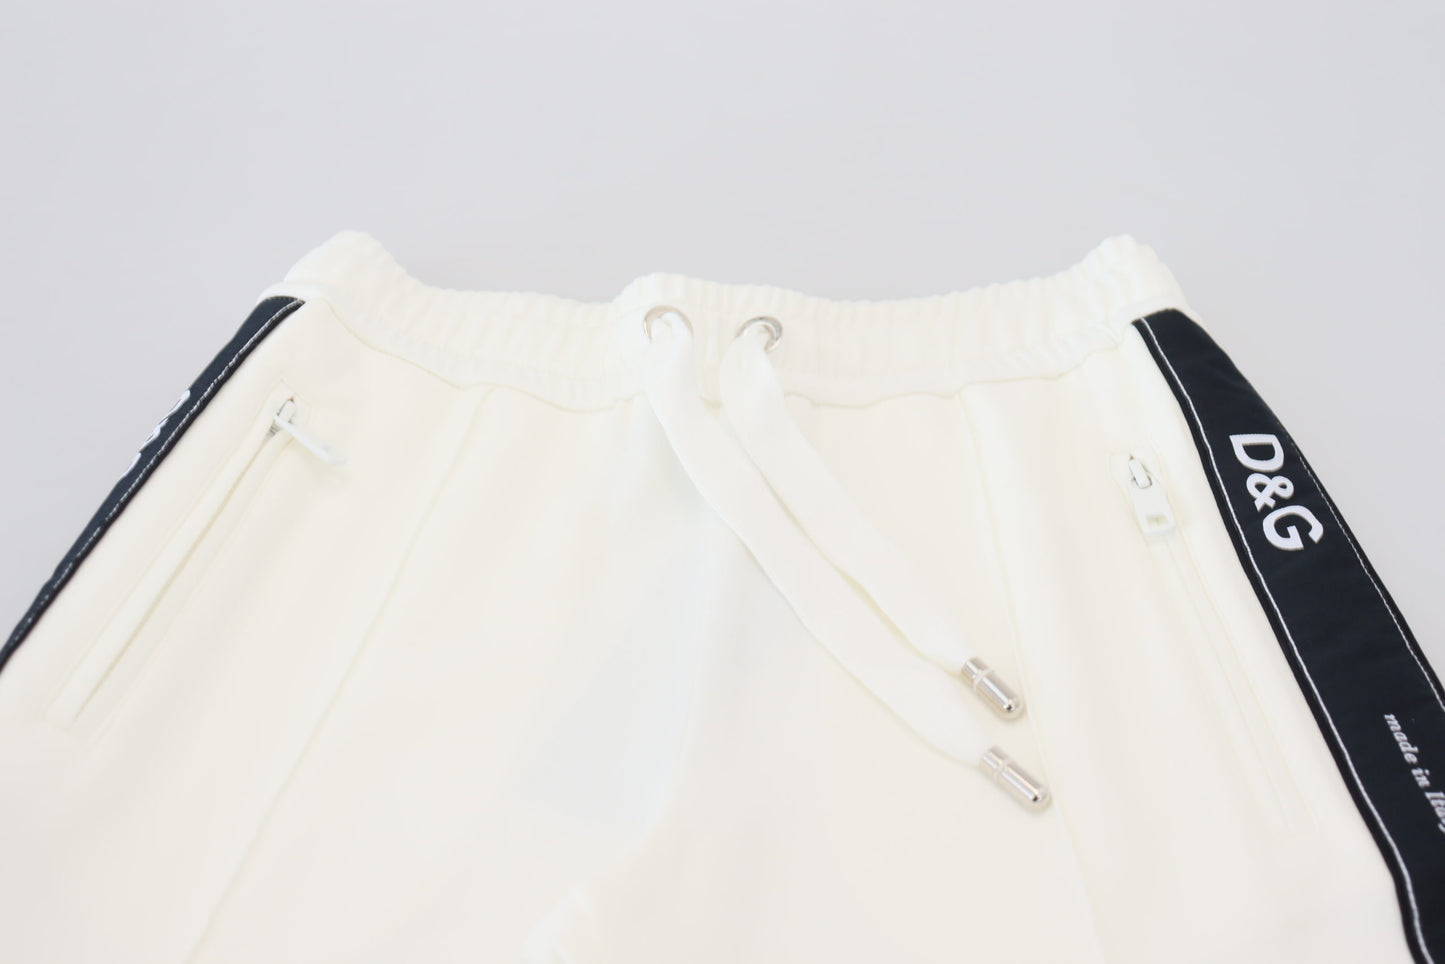 Dolce & Gabbana Chic White Jogger Pants for Elevated Comfort